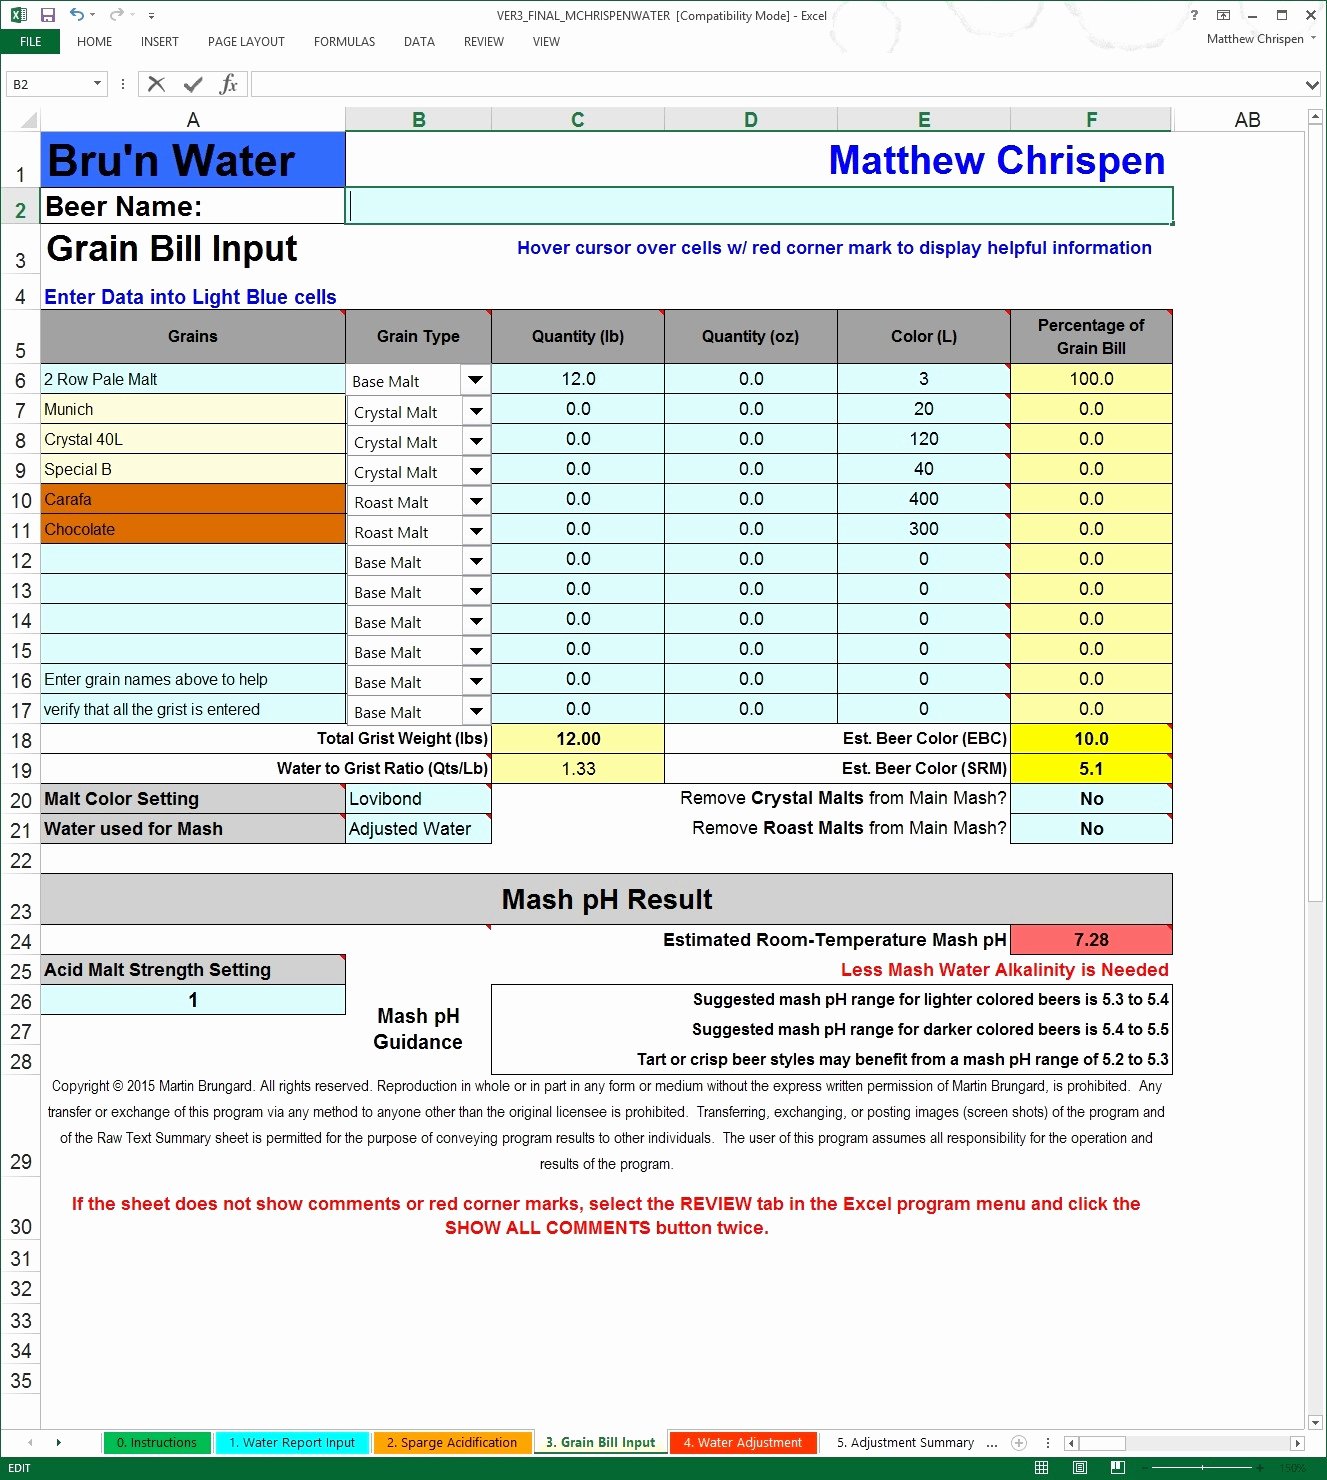 Certificate Of Insurance Template Awesome Insurance Certificate Tracking Spreadsheet Spreadsheet